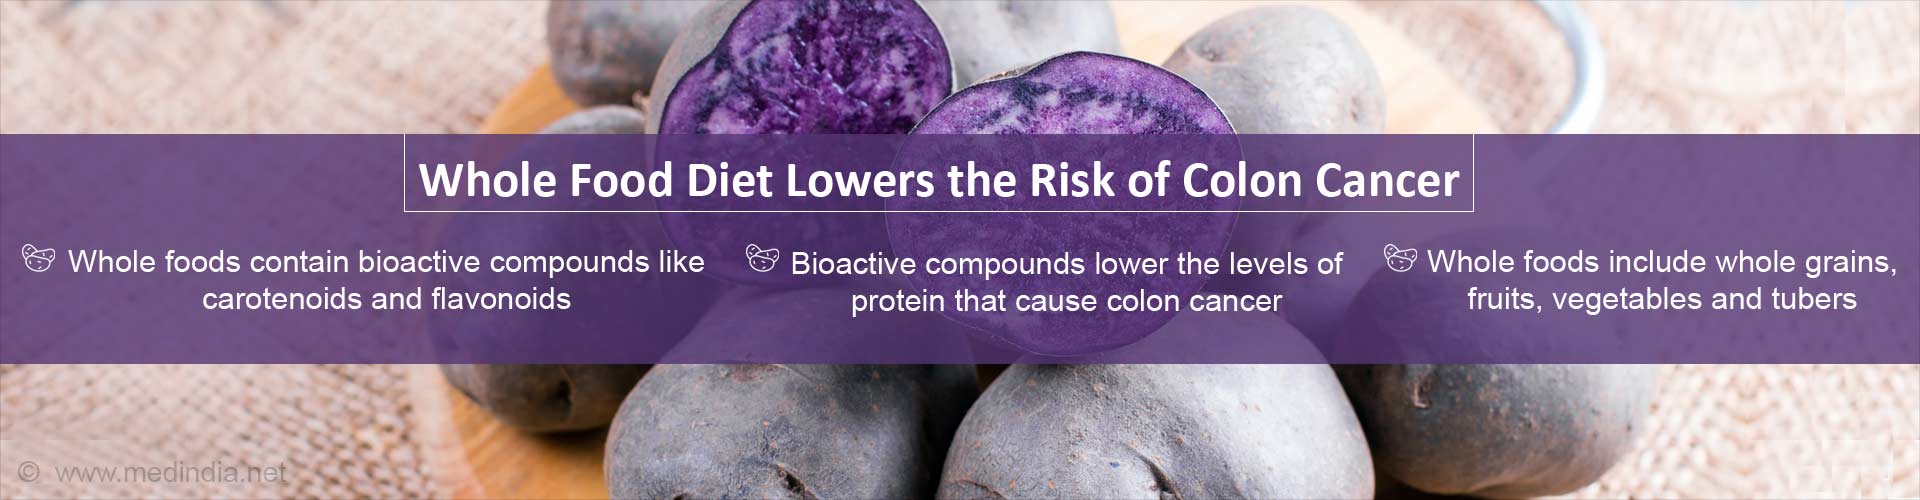 Whole food diet lowers the risk of colon cancer
- Whole foods contain bioactive compounds like carotenoids and flavonoids
- Bioactive compounds lower the levels of protein that cause colon cancer
- Whole foods include whole grains, fruits, vegetables and tubers